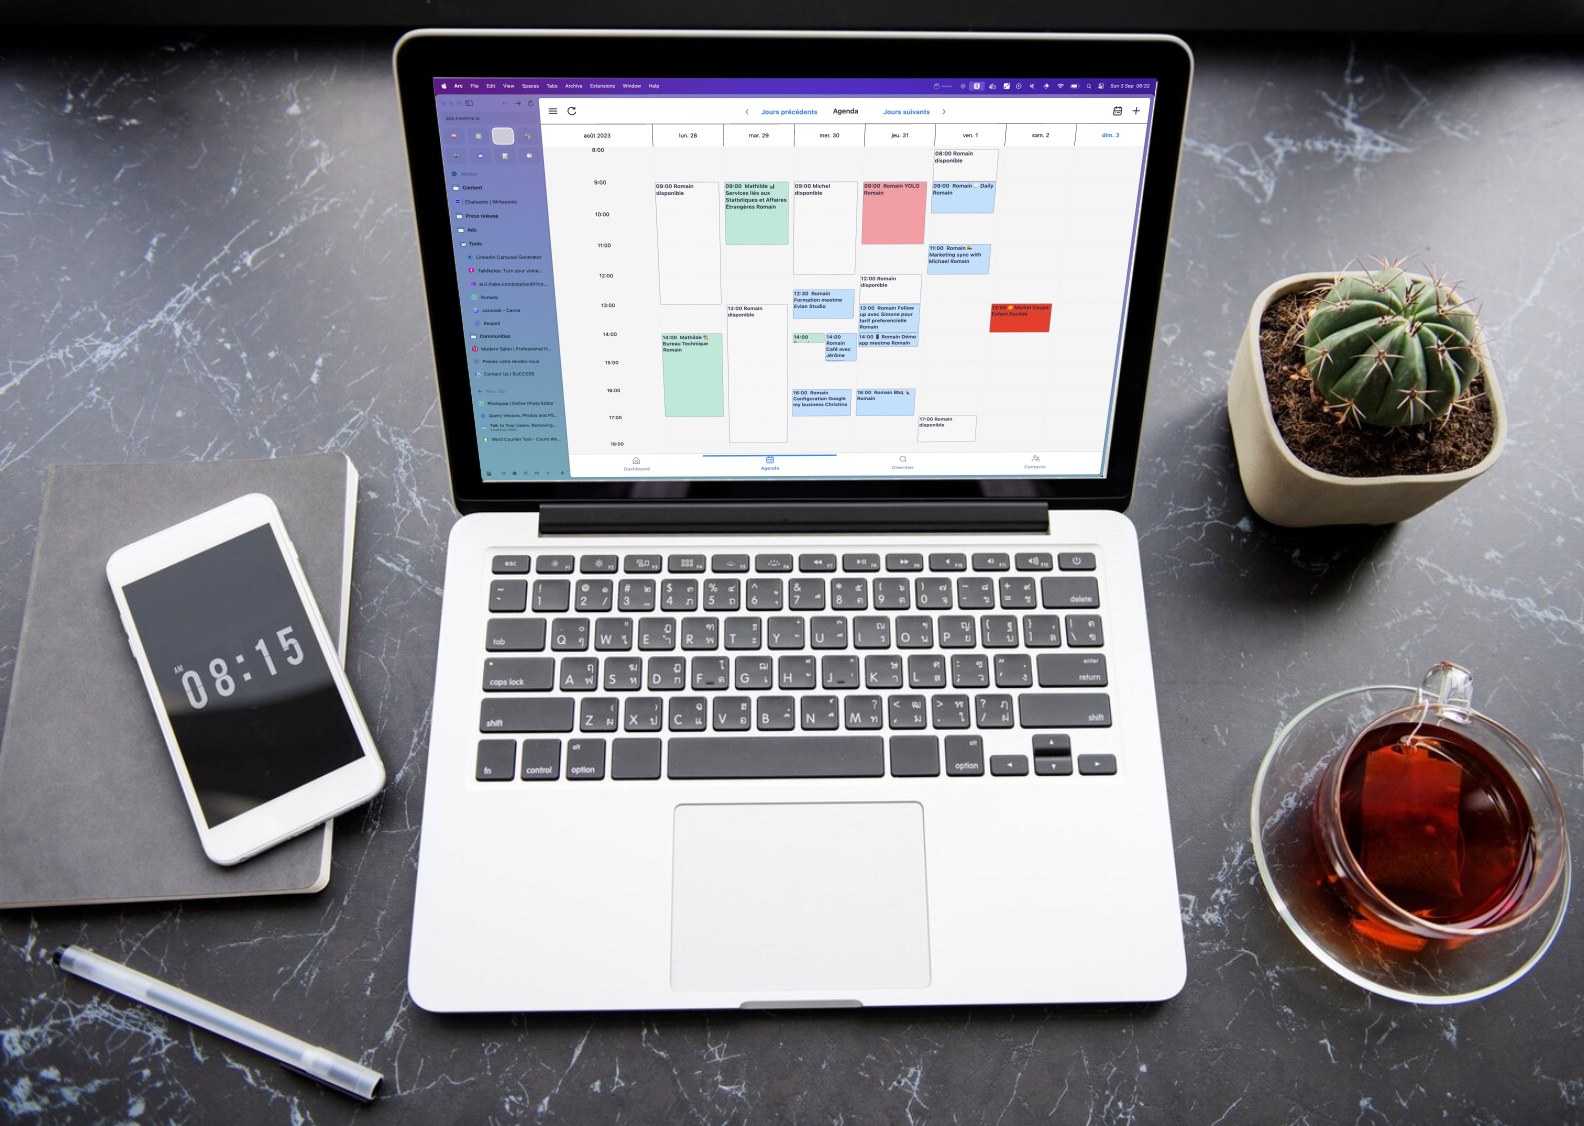 Meetme in action: The ultimate synergy of calendars, online scheduling, and efficiency on one desk.